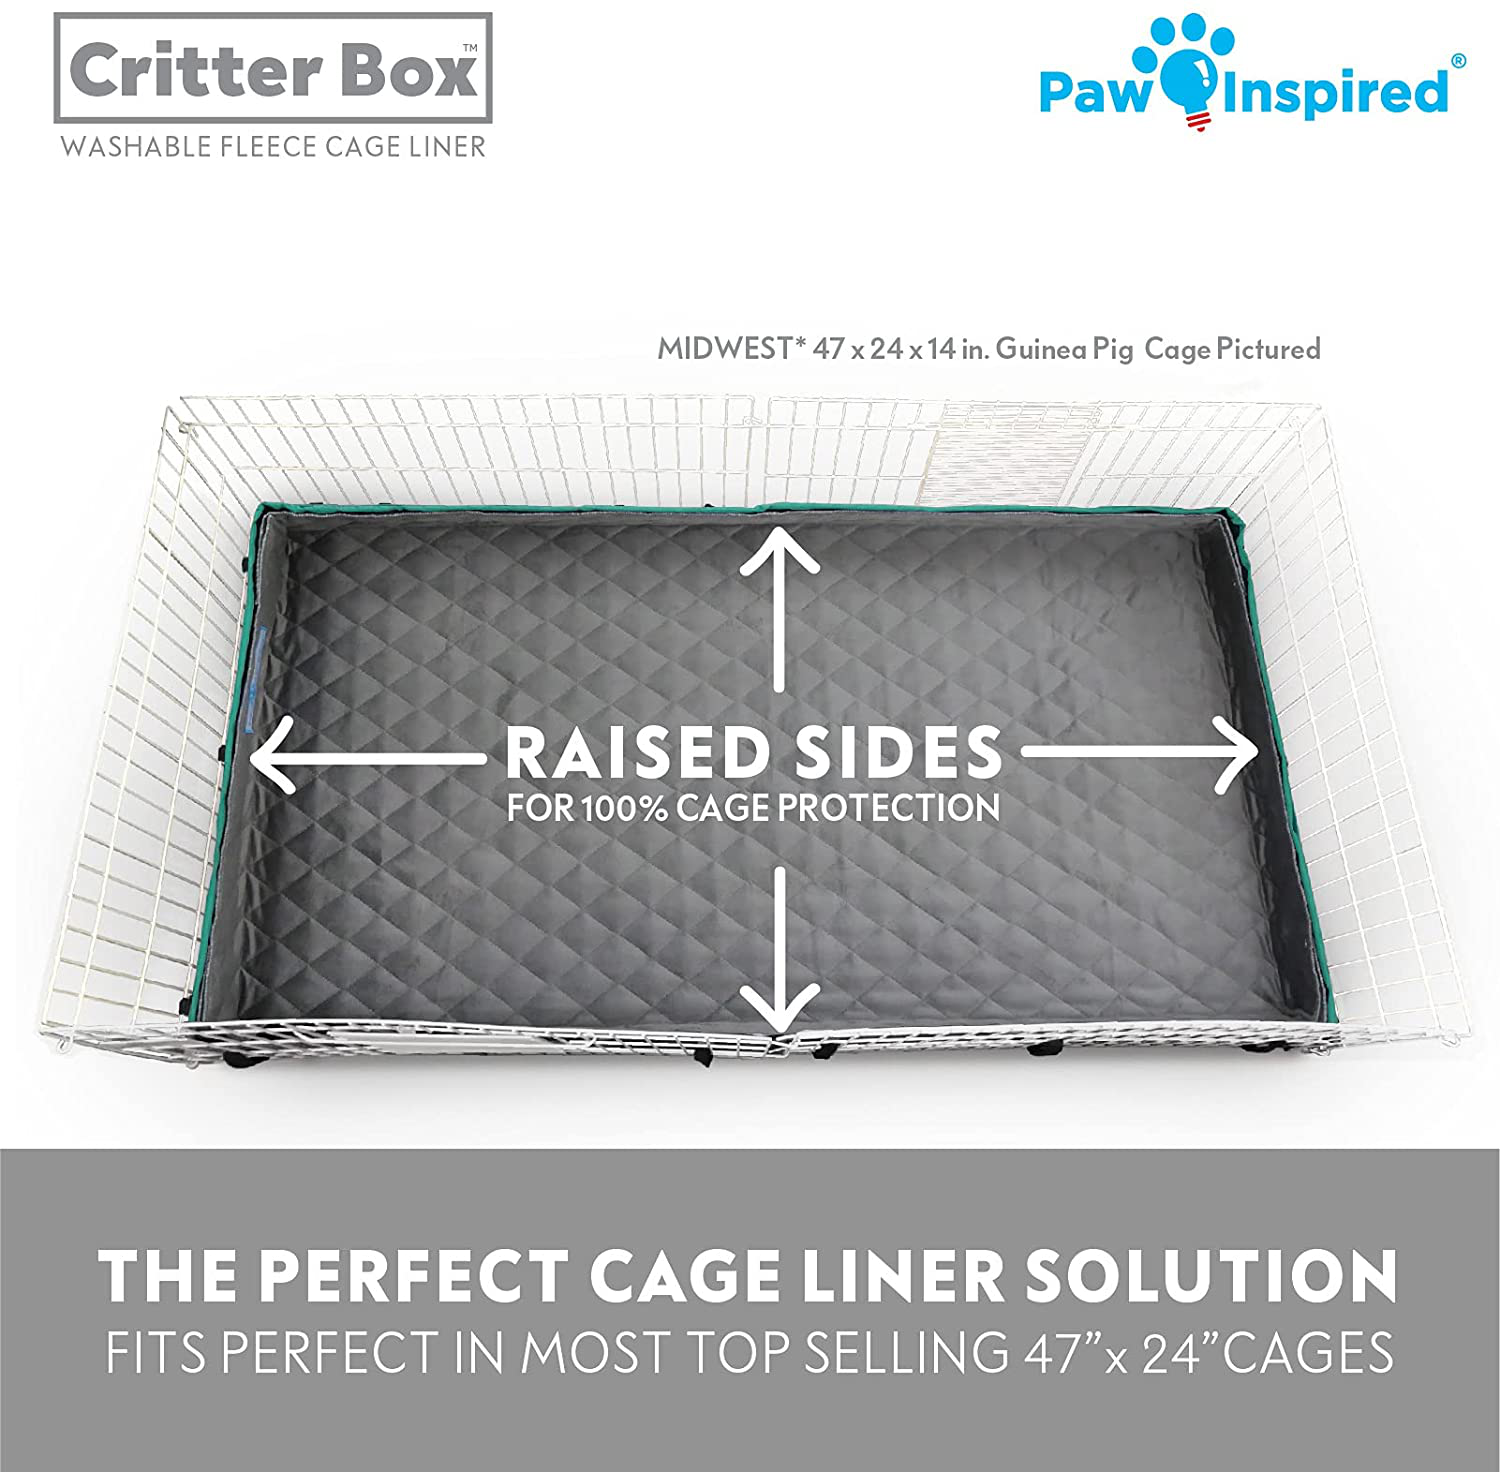 Paw Inspired Critter Box | Washable Guinea Pig Cage Liners with Raised Sides | Super Absorbent Fleece Bedding for Guinea Pigs Rabbits, Hamsters, & All Small Animals | Edge Protected Pee Pads